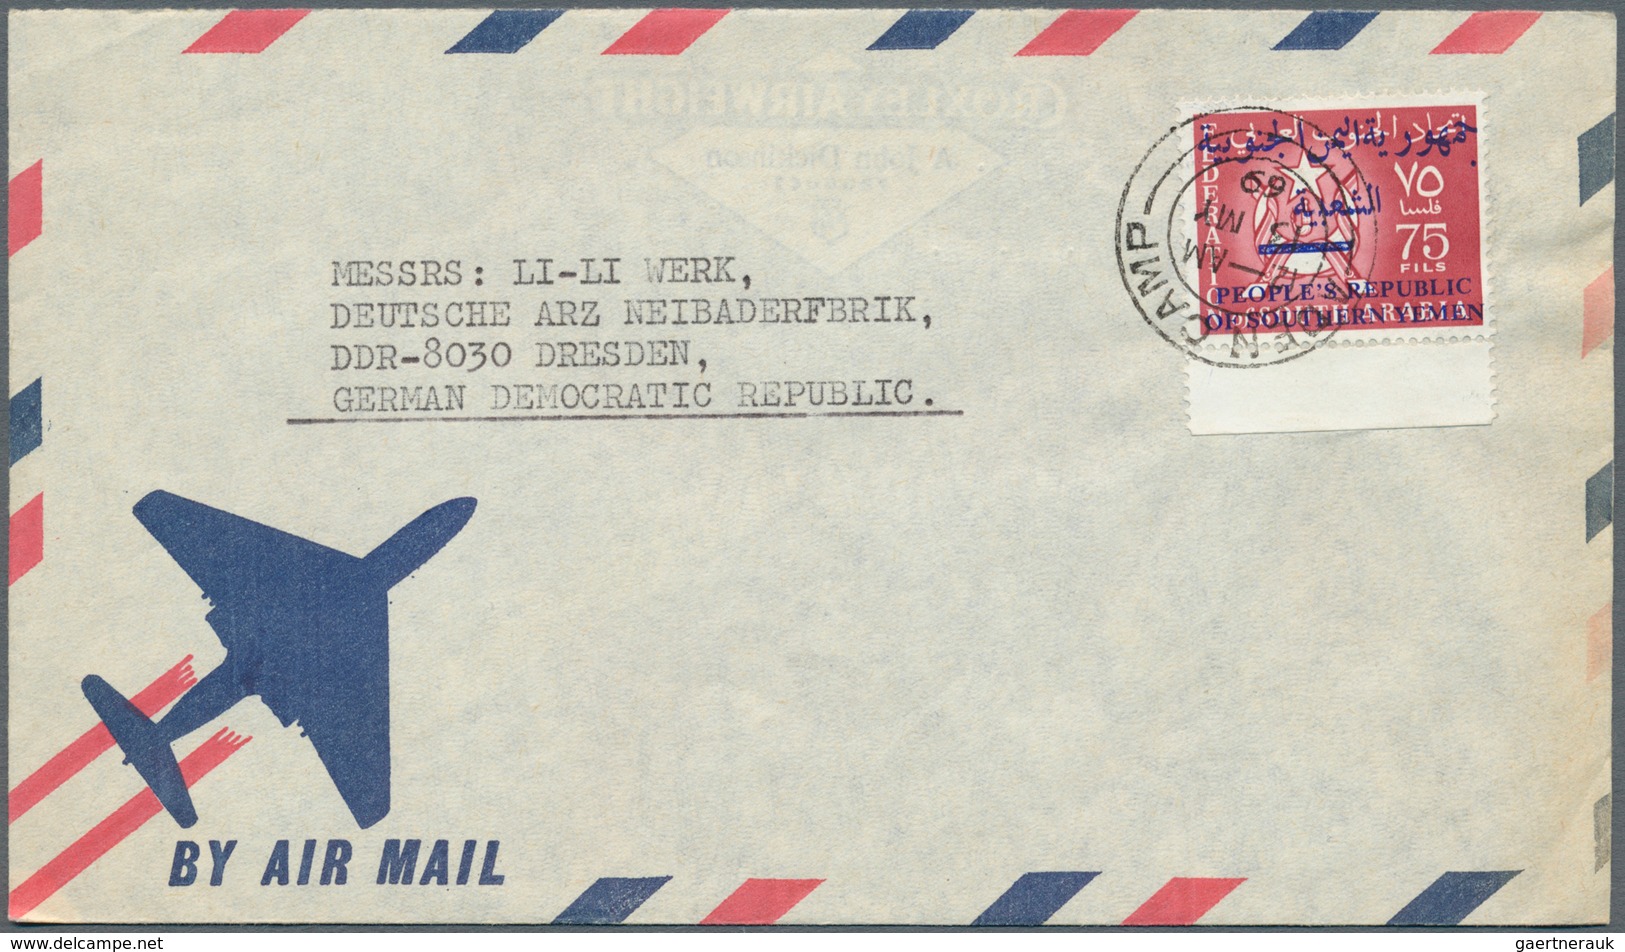 22998 Jemen: 1935/80 (ca.), Lot of 51 comercial covers, many airmails, some interesting cancellations, mos